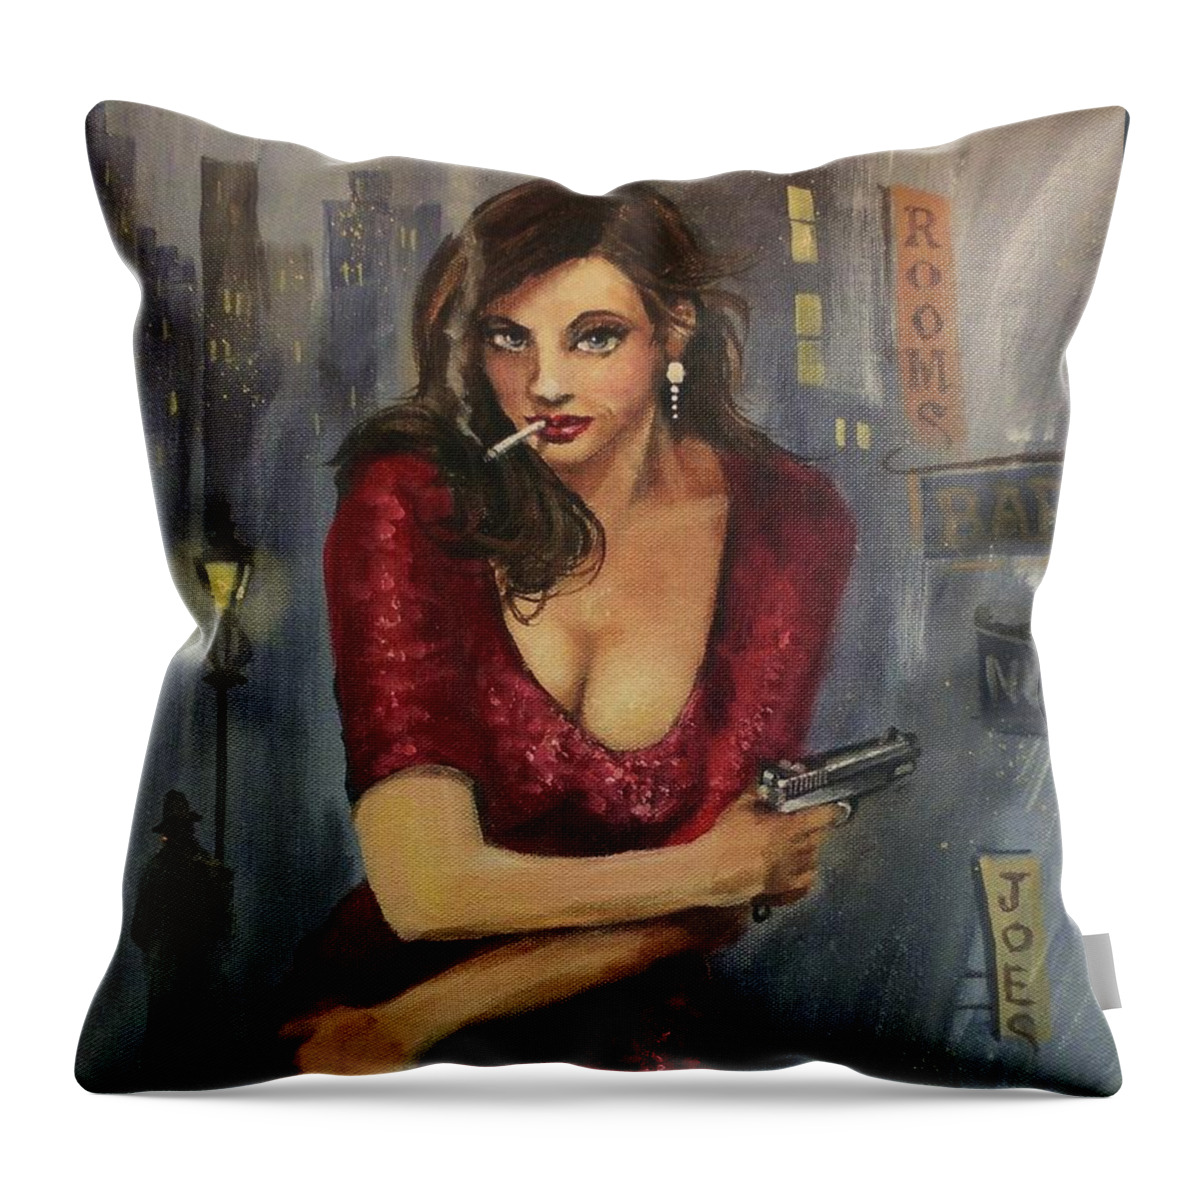 City At Night Throw Pillow featuring the painting Bad Girl by Tom Shropshire